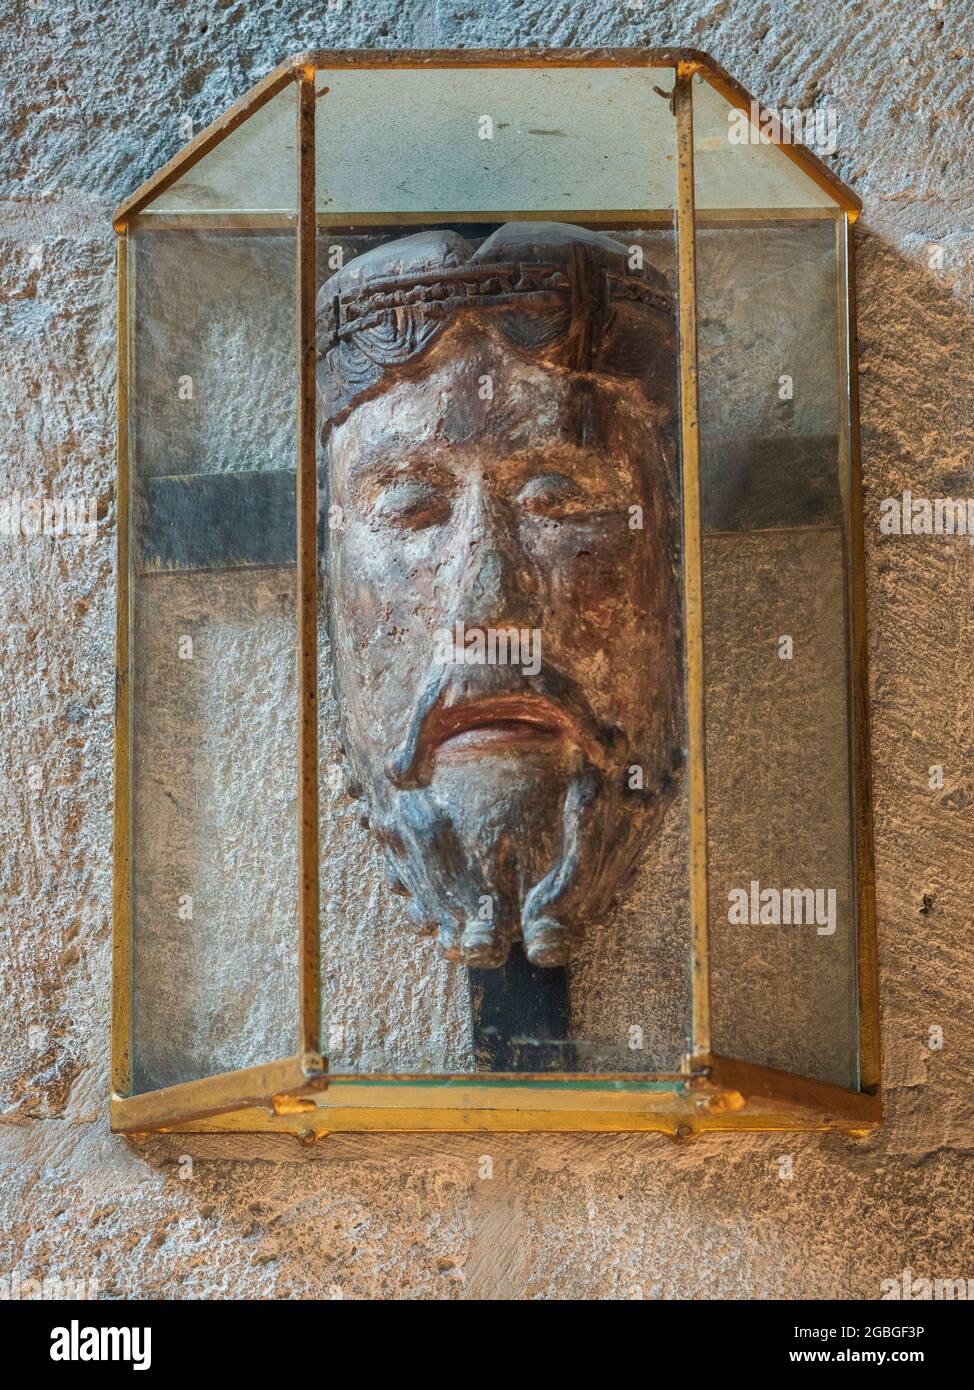 Reproduction of the head of 'Christ of Lavaudieu' statue of the 12th century. Abbey Church, Lavaudieu, Auvergne, France. Stock Photo